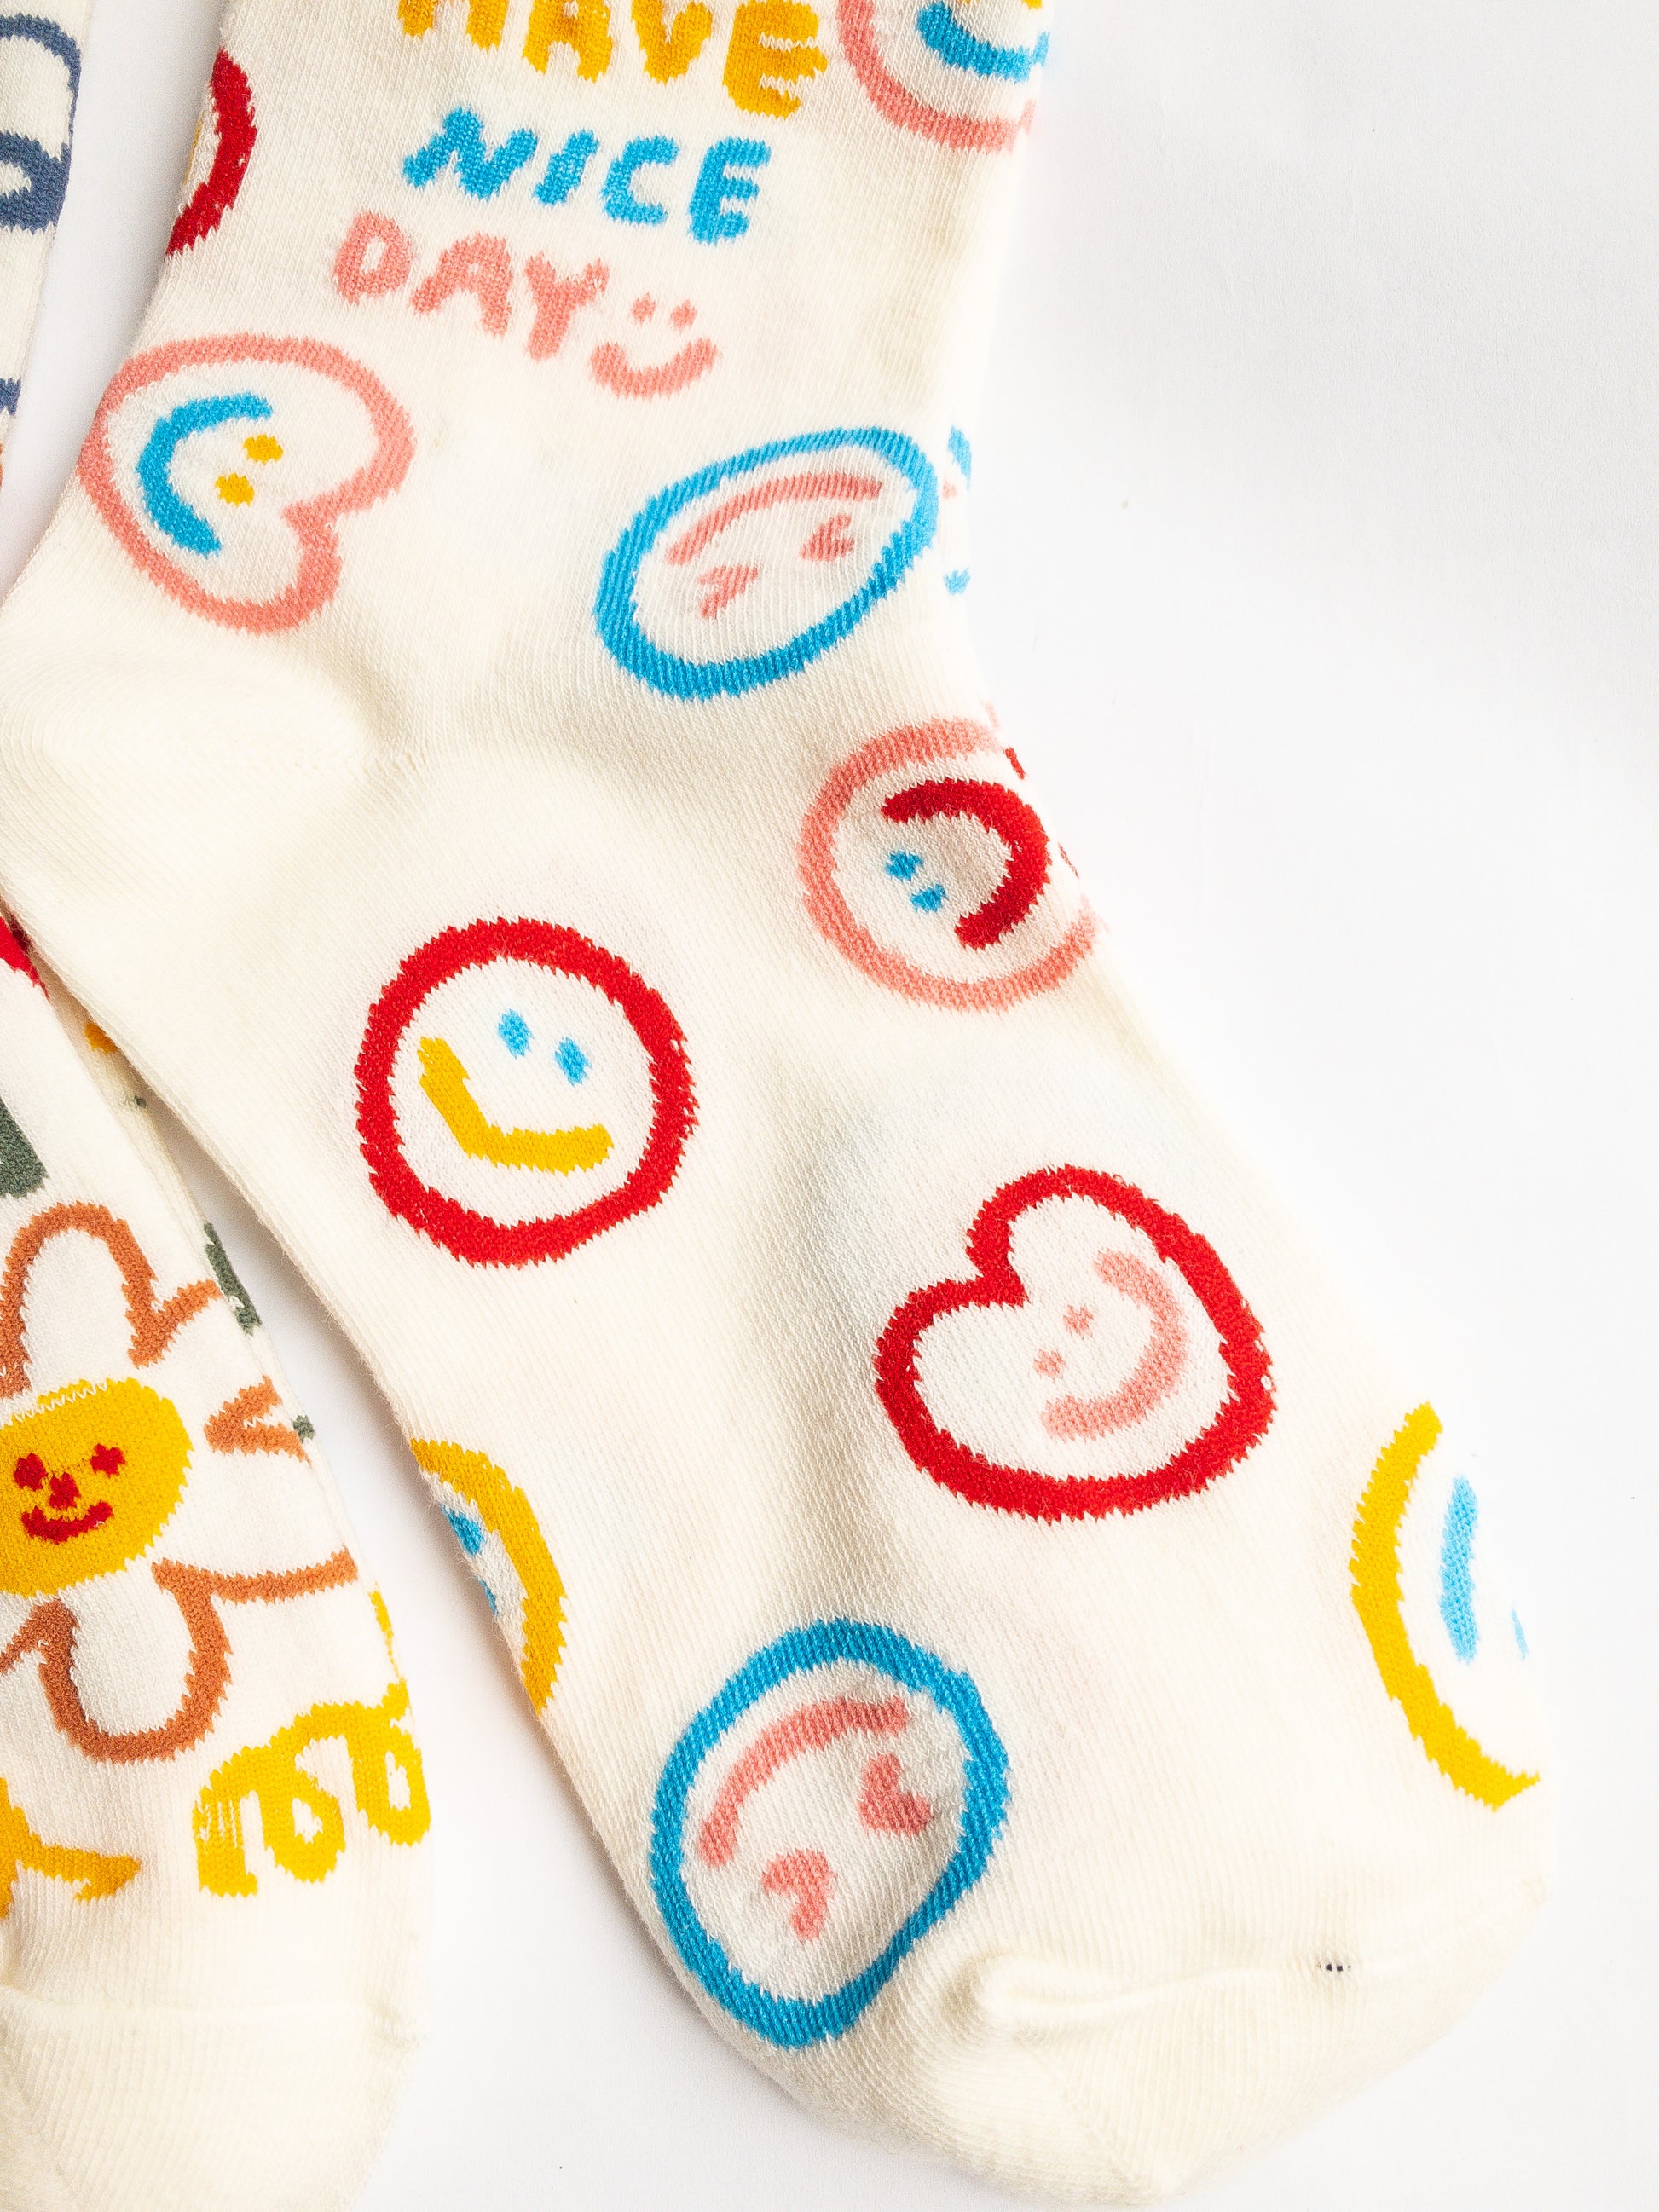 Playful and doodly Have a Nice Day socks! These thick, cozy, and comfortable crew socks feature a cheerful doodle smiley face and flower design, sure to put a smile on your face and a spring in your step every day. 